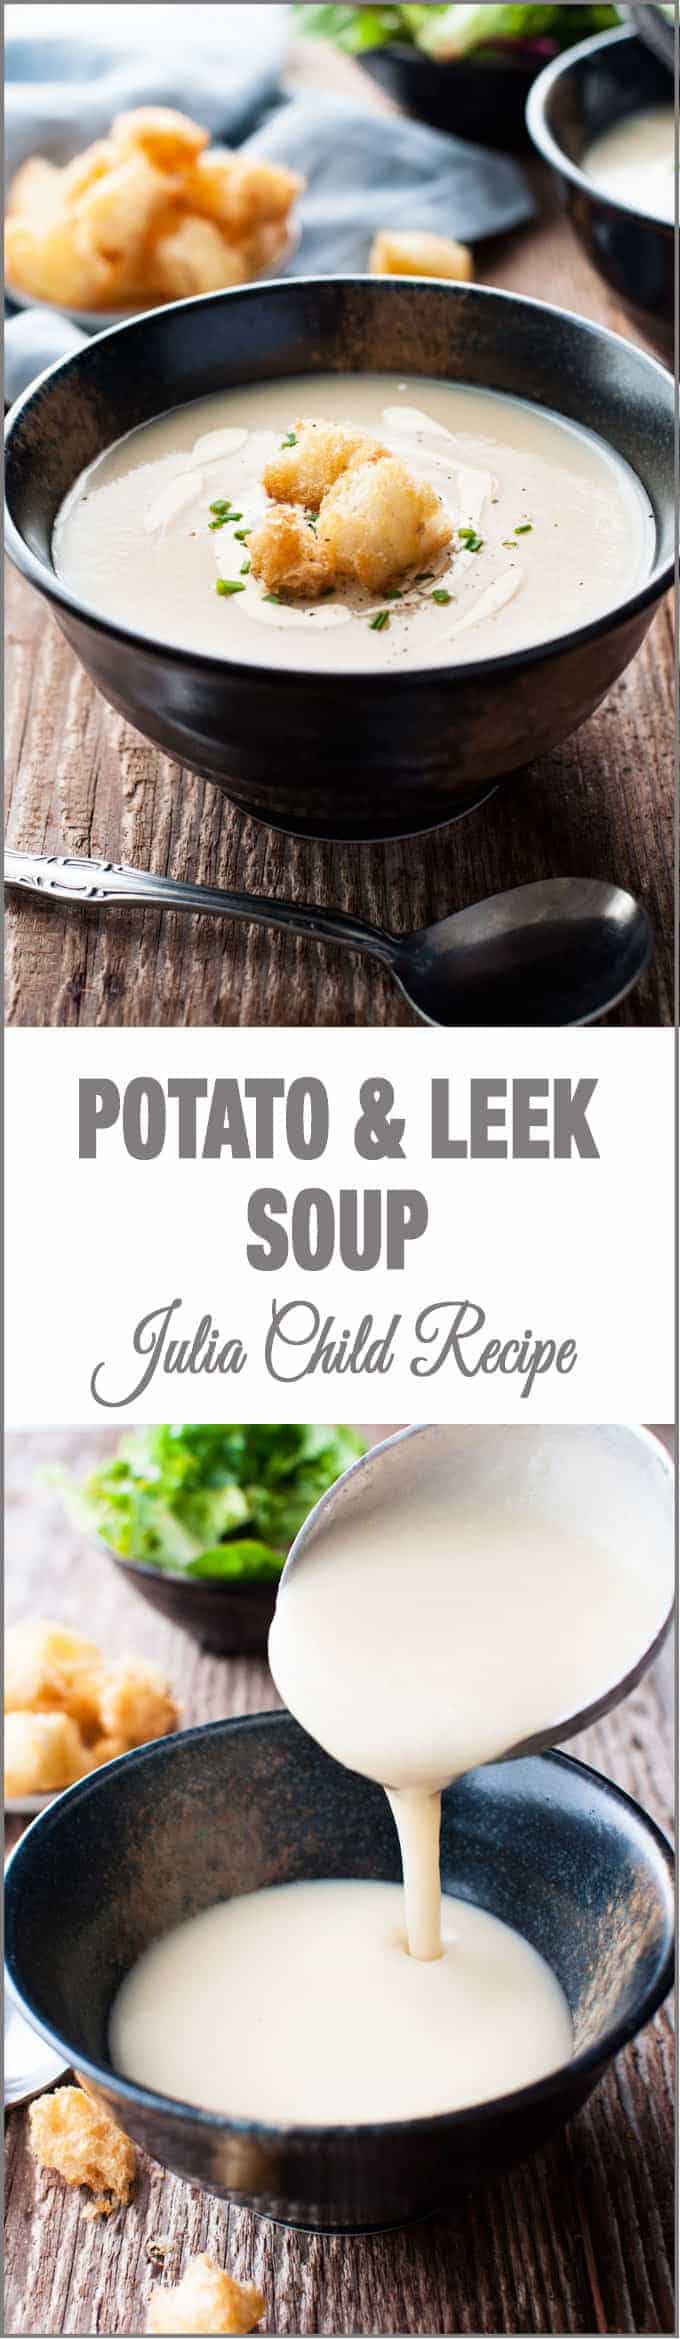 French Potato and Leek Soup (Julia Child Recipe) - Learn how easy it is to make this classic French soup!